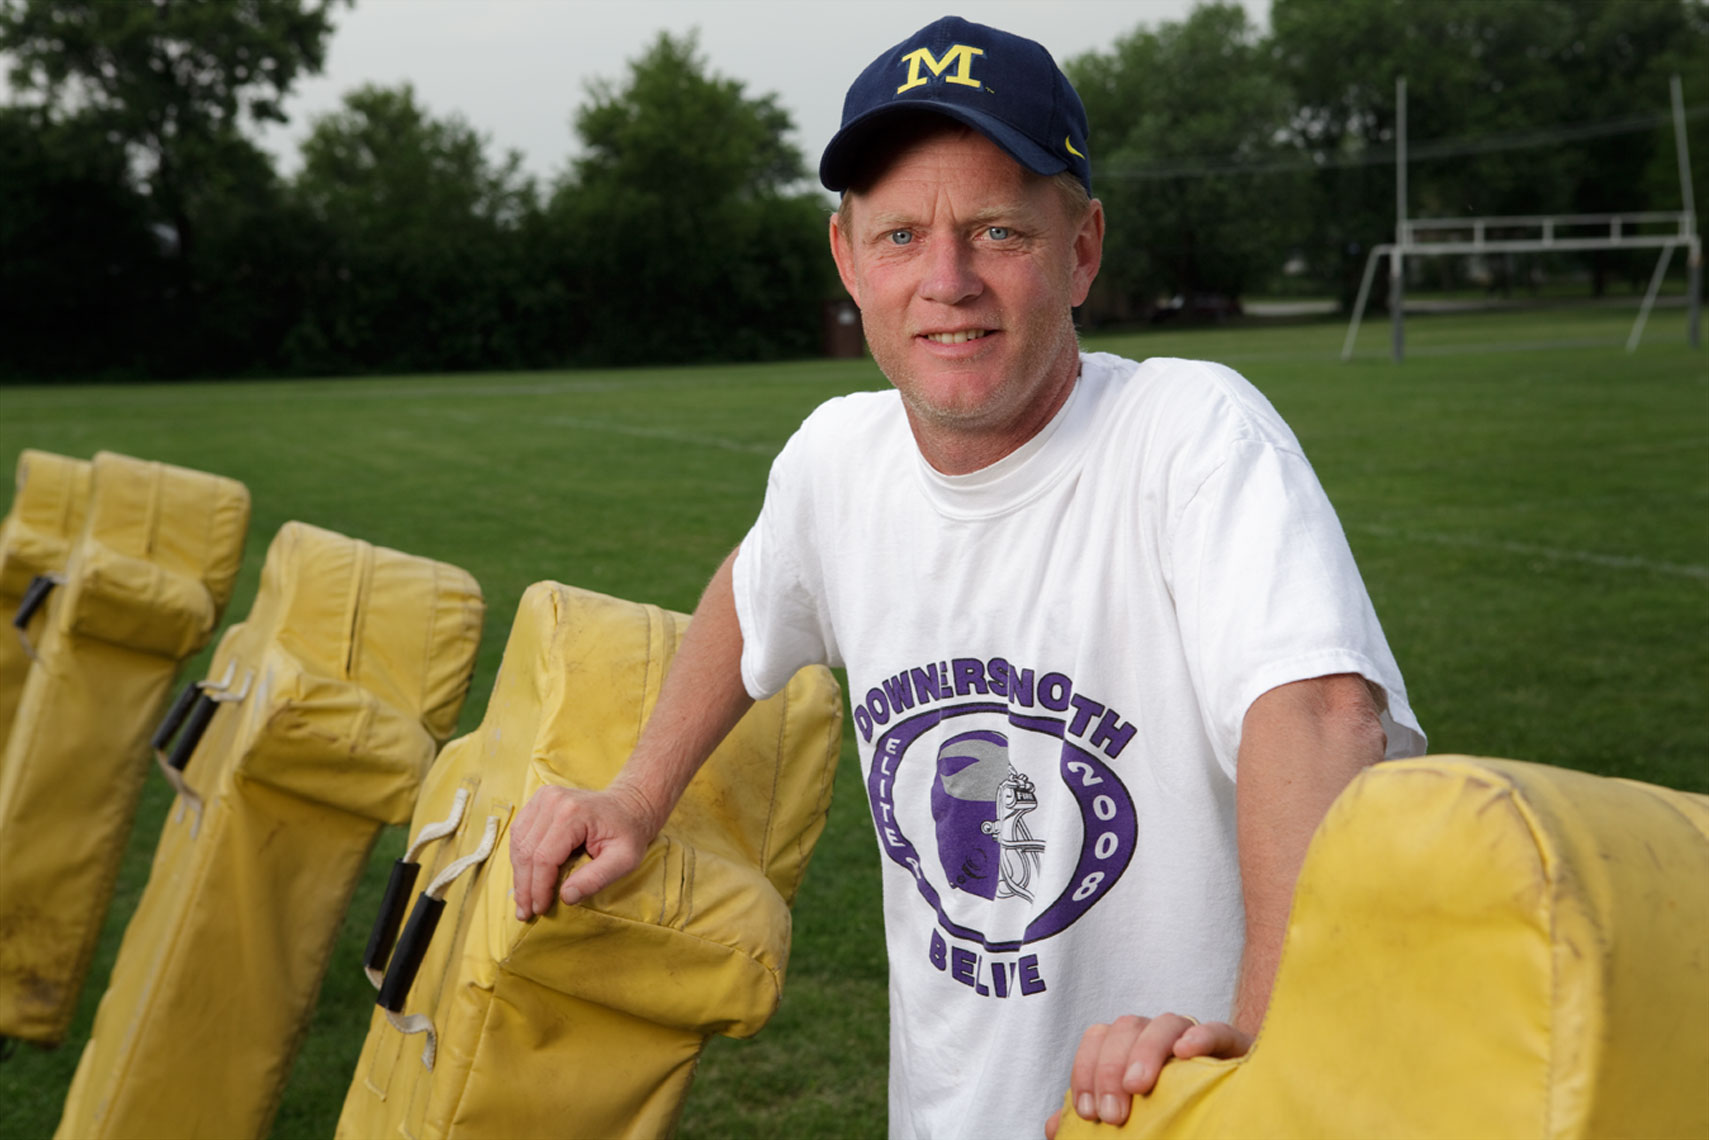 High school football coach with University of Michigan hat standing by yellow blocking sled.